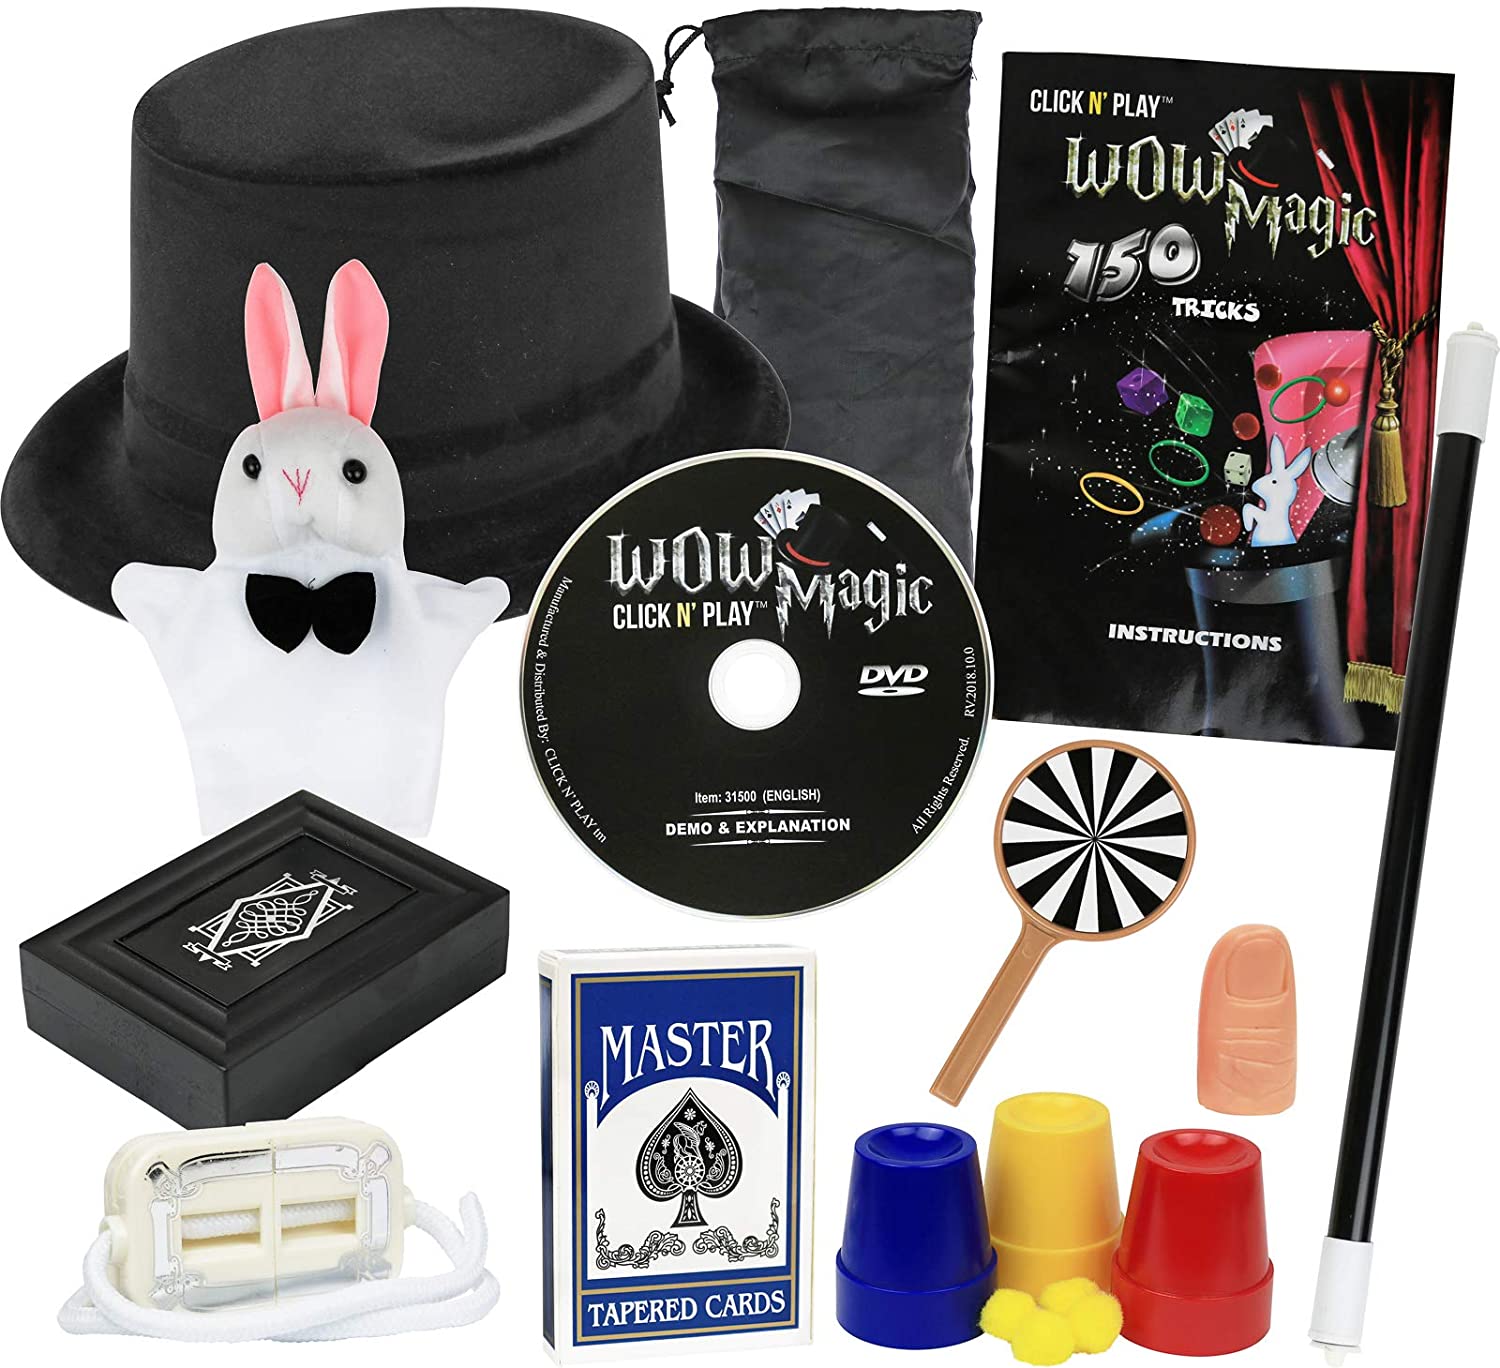 Click N' Play Magician Dress Up Magic Tricks Set for Kids Over 150 Tricks Includes Manual & DVD Tutorial , Brown $15.99